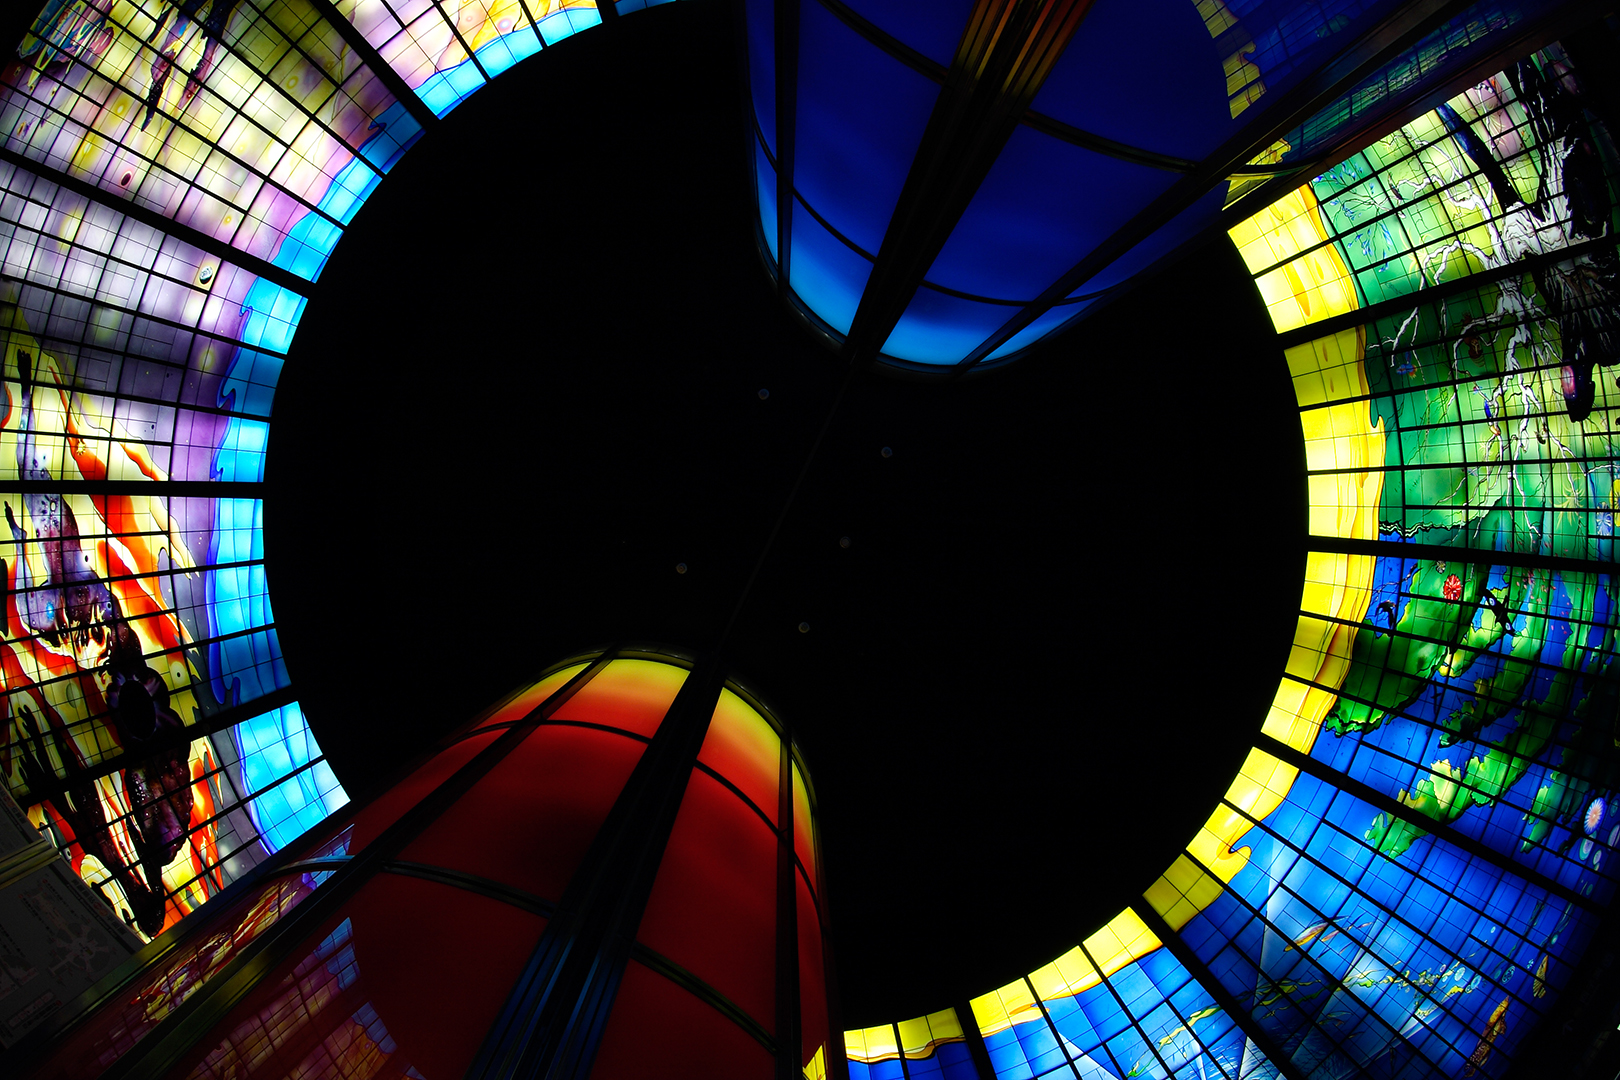 the interior view of a stained glass structure